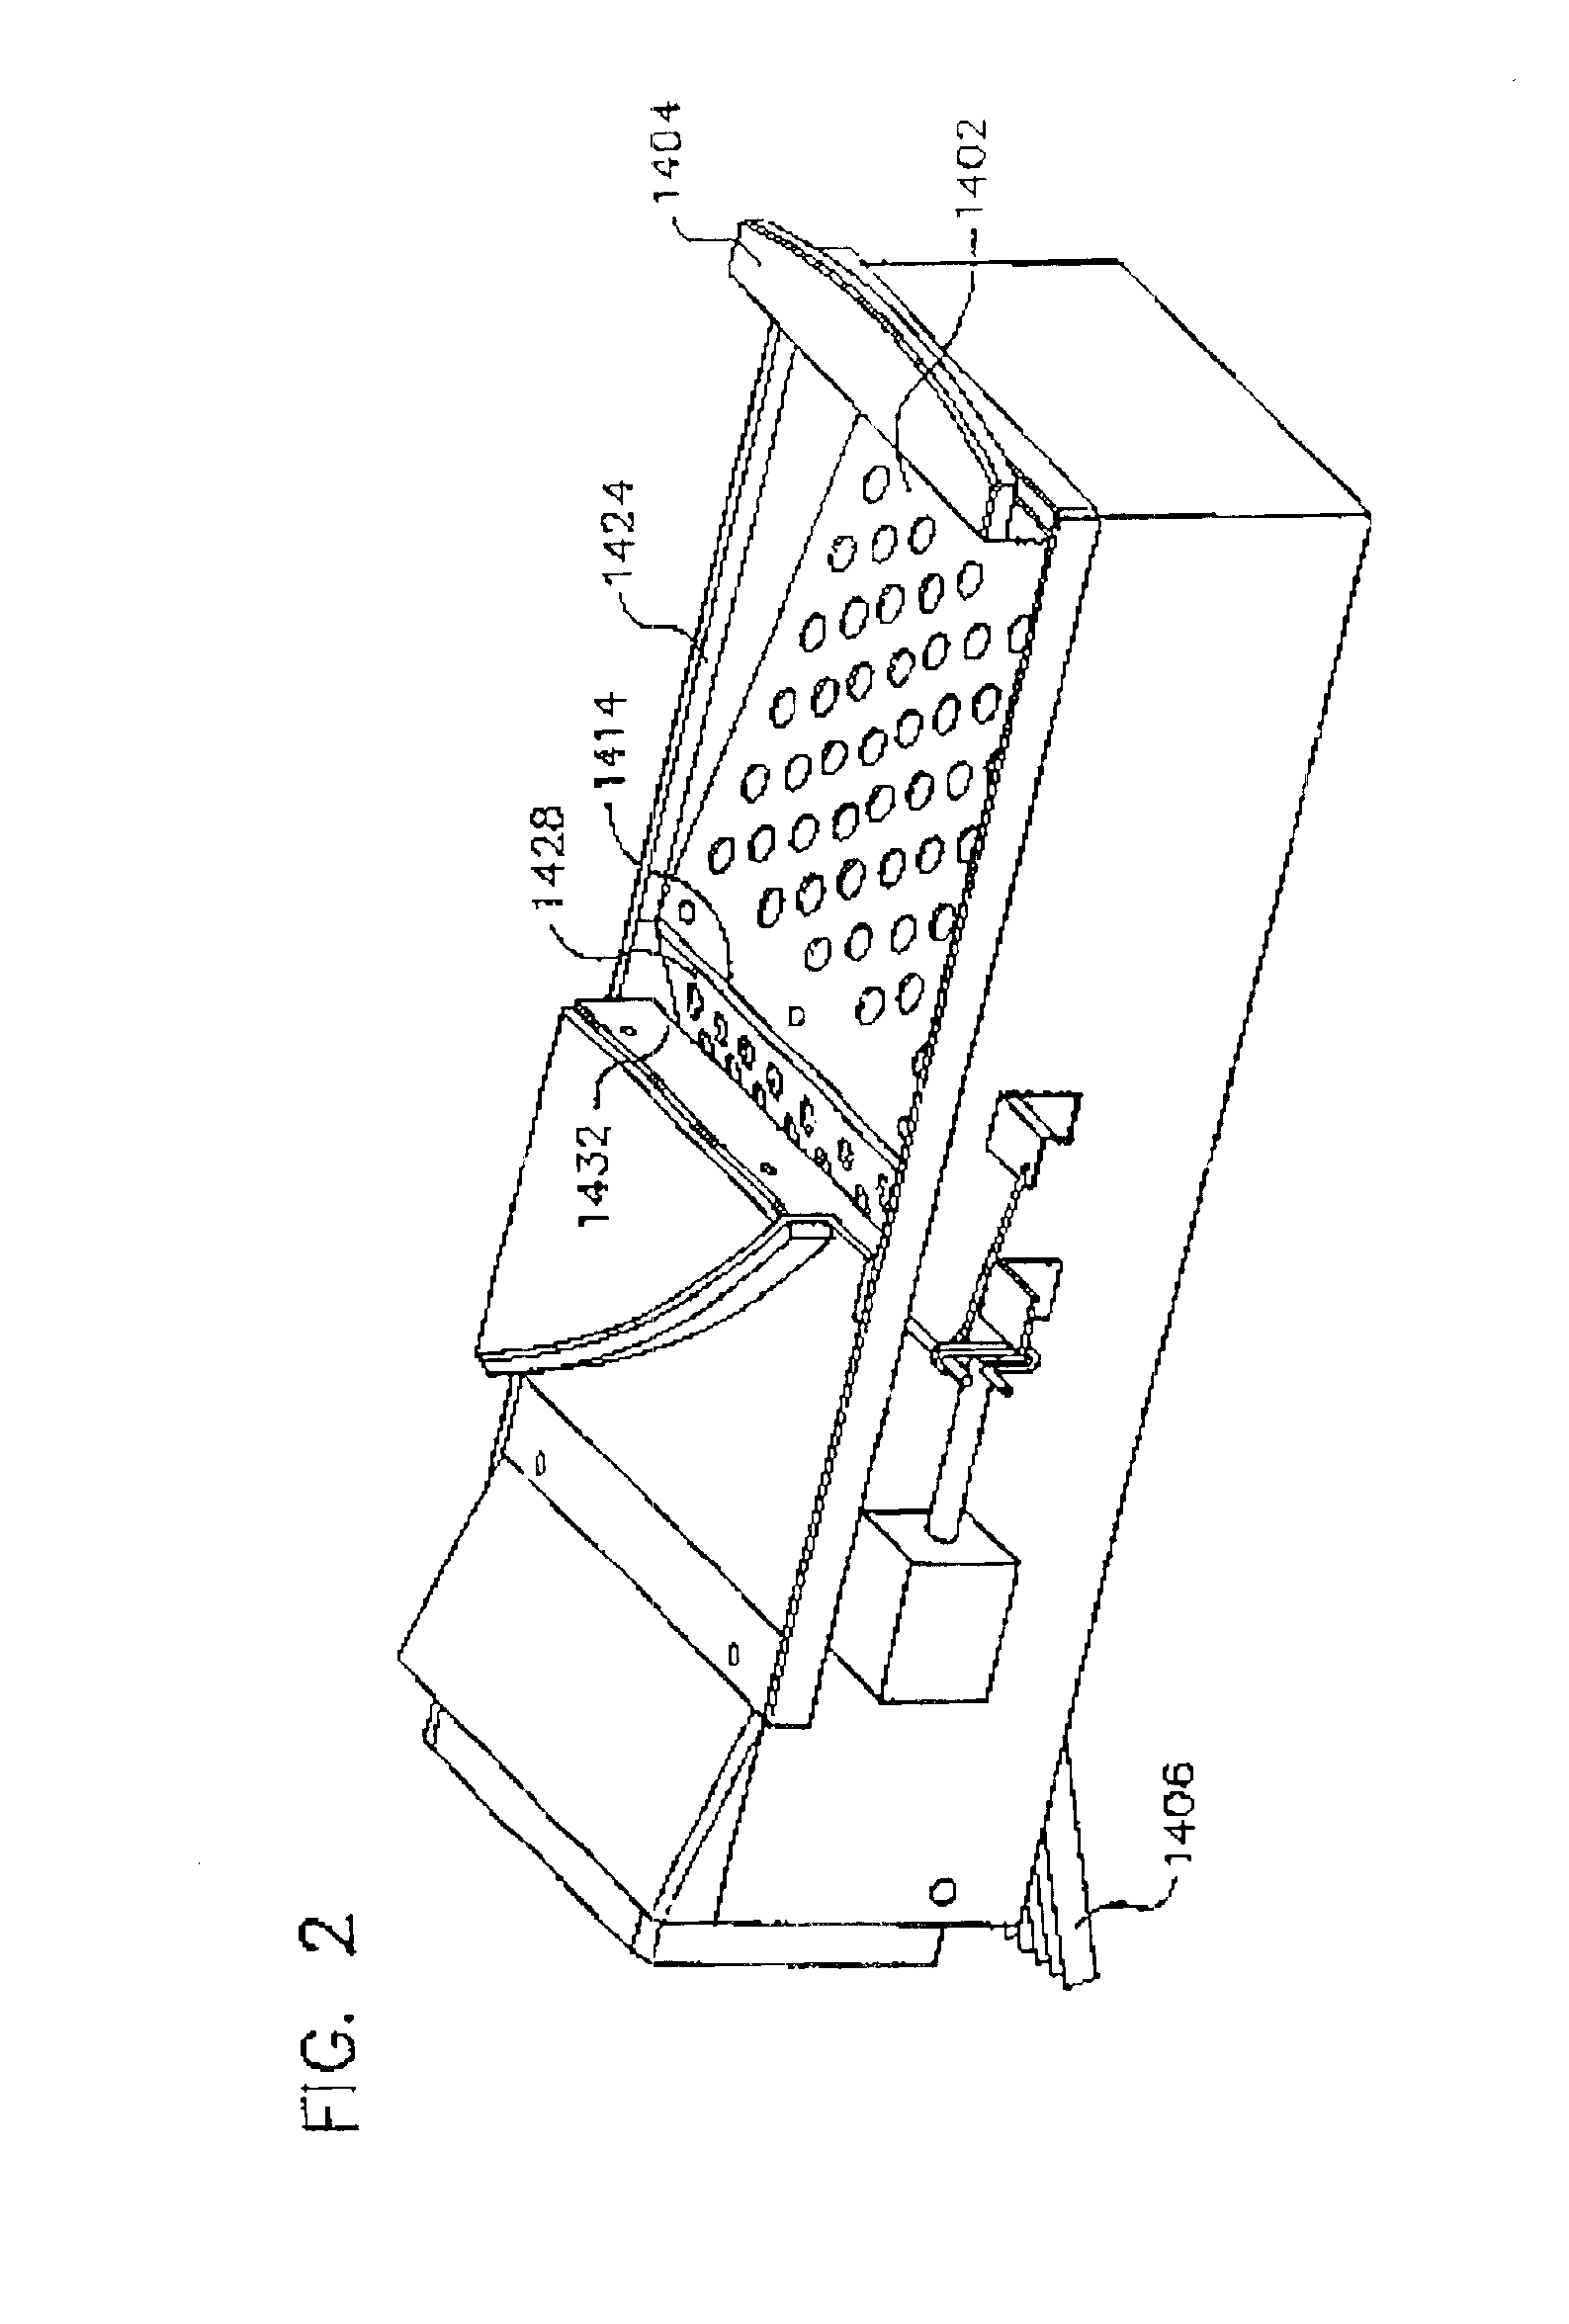 Method and apparatus for conditioning coins prior to discrimination